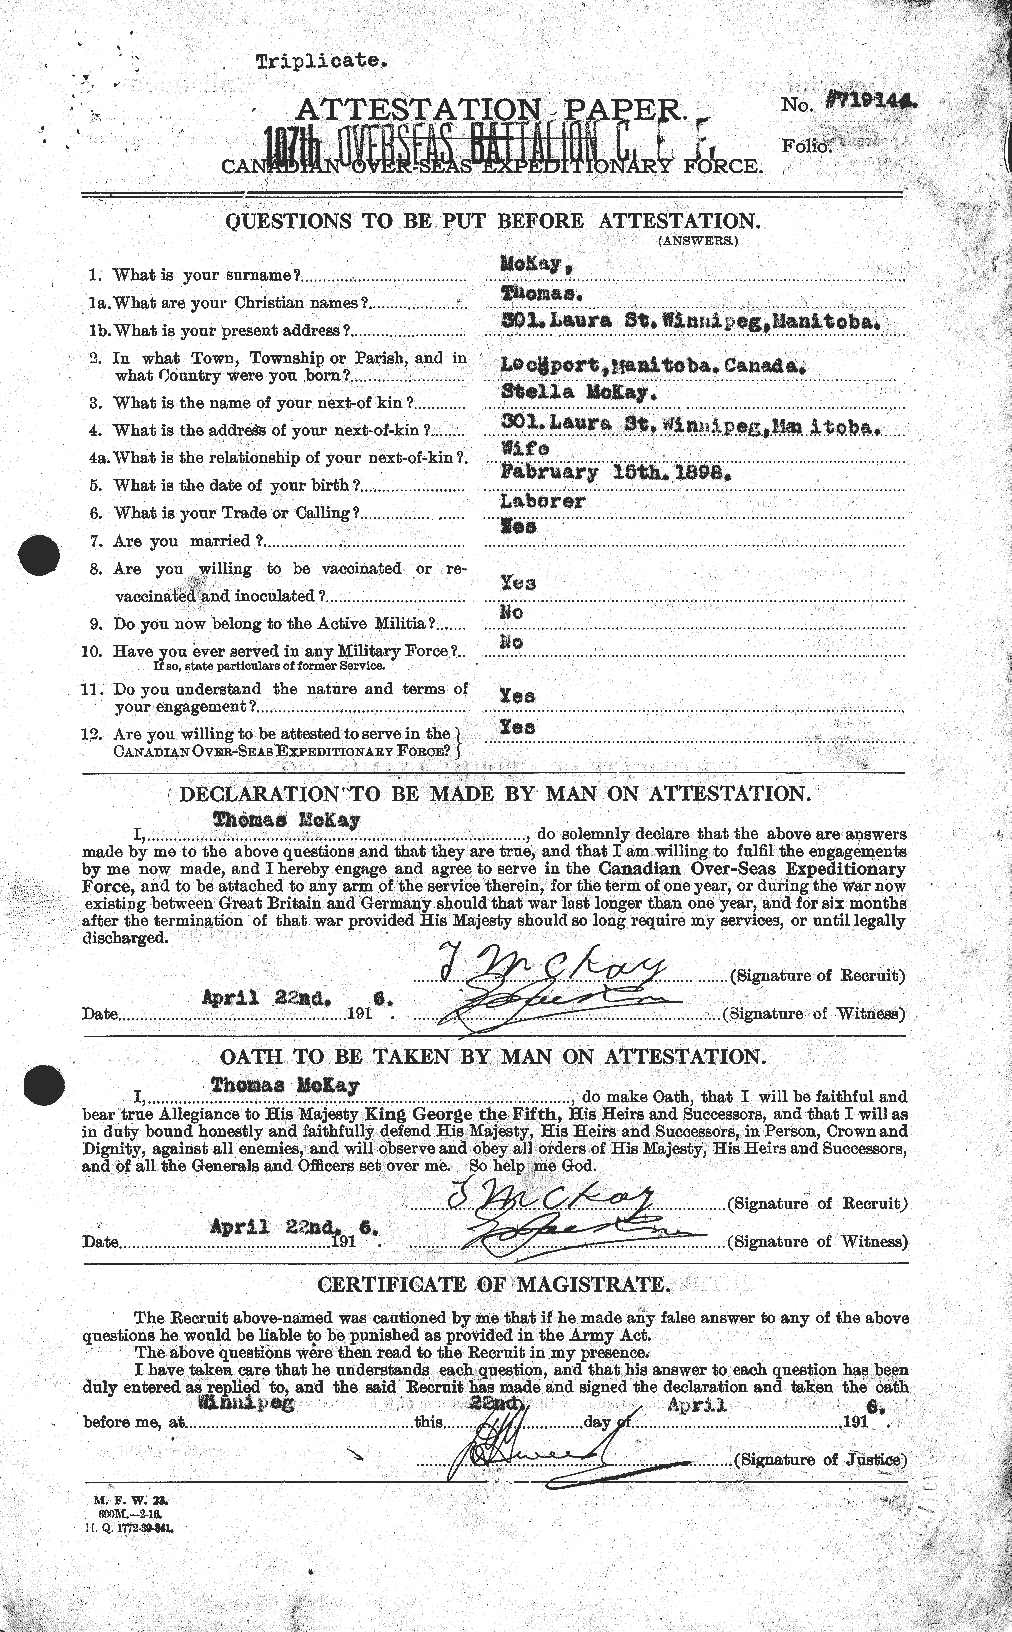 Personnel Records of the First World War - CEF 530158a